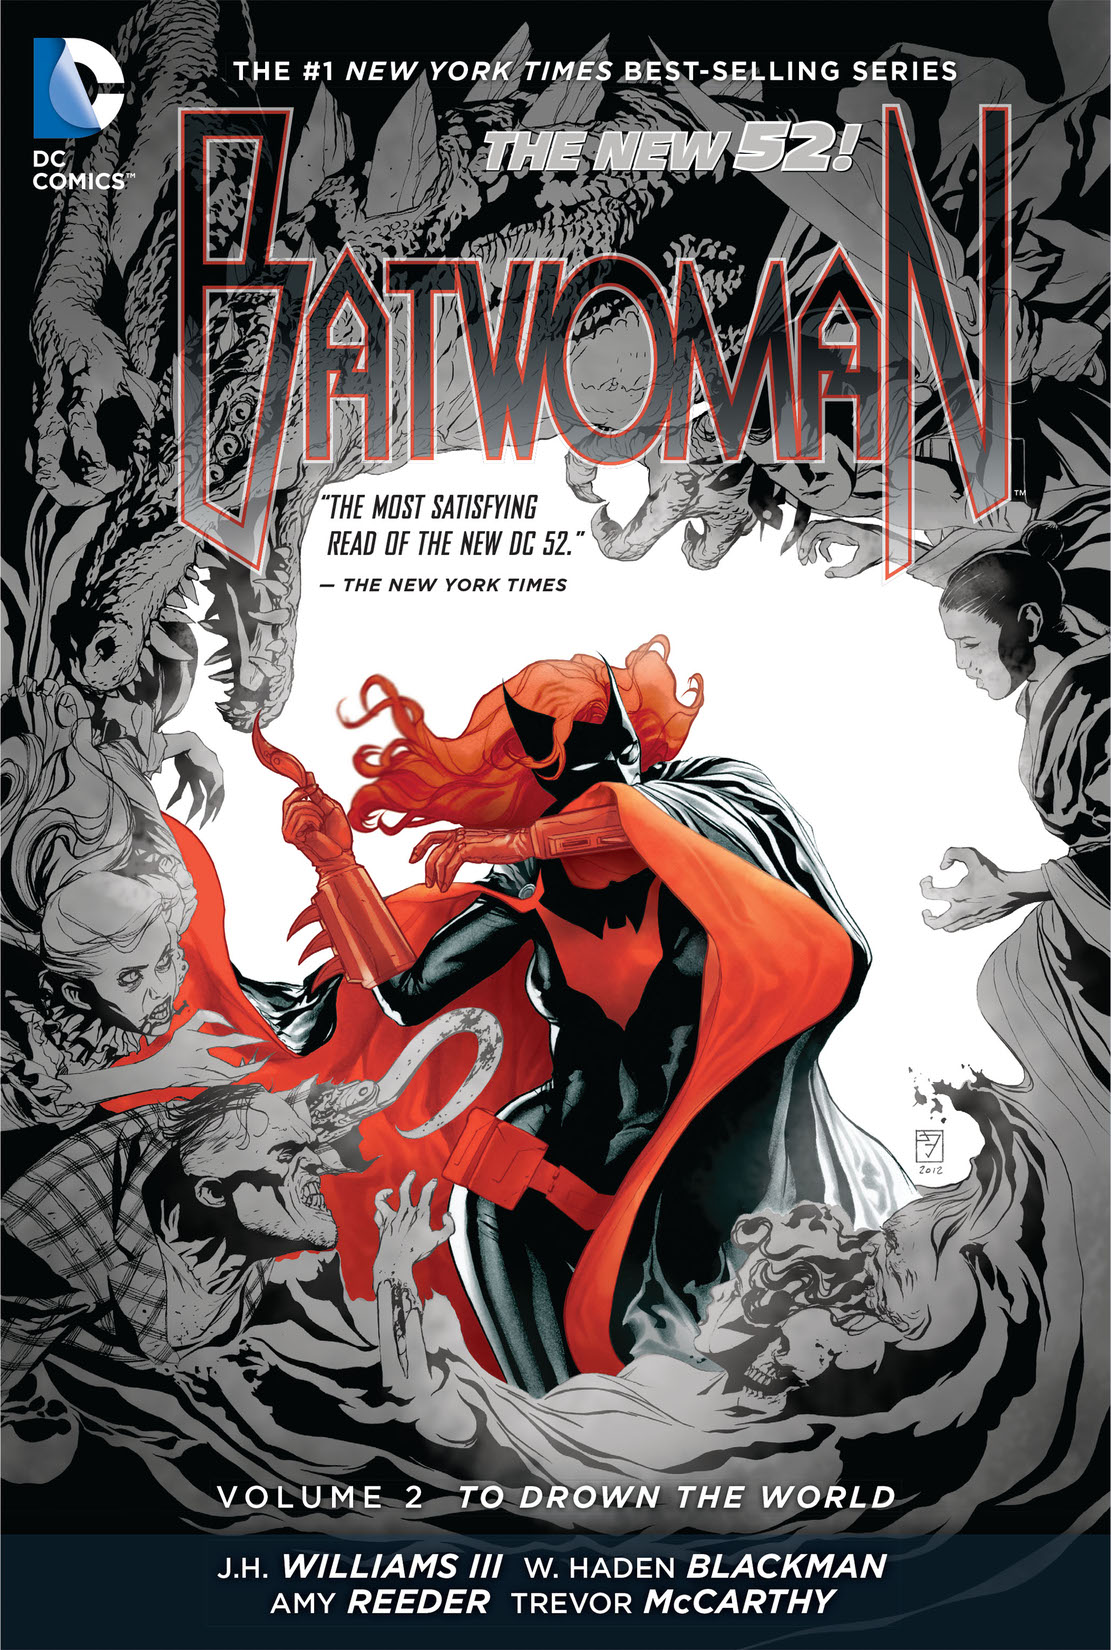 Batwoman Vol. 2: To Drown the World preview images